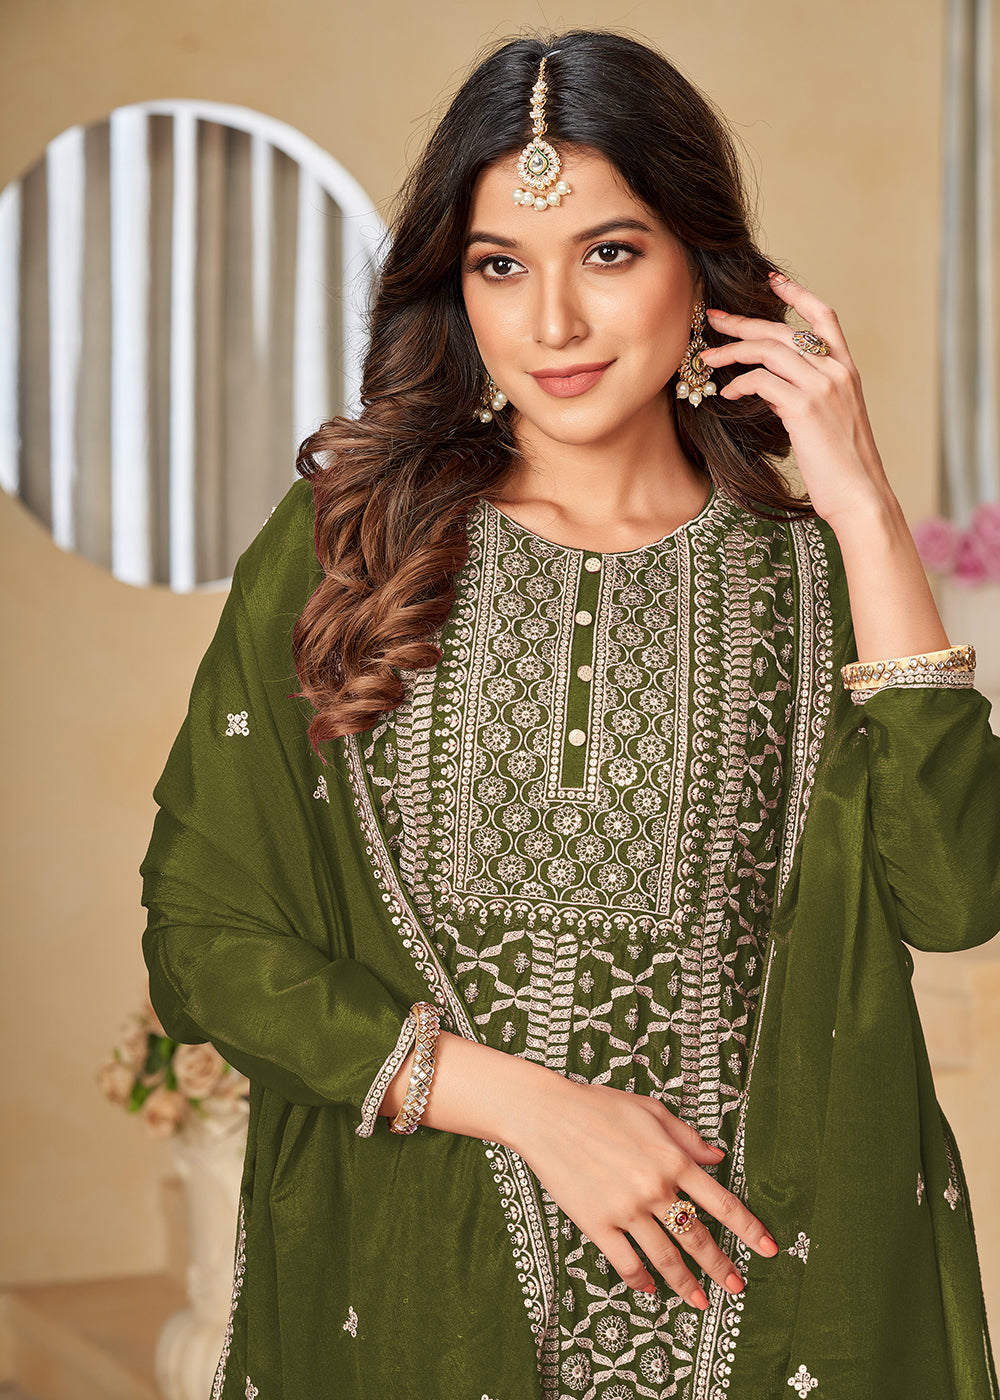 Buy Now Chinnon Olive Green Embroidered Palazzo Salwar Suit Online in USA, UK, Canada, Germany, Australia & Worldwide at Empress Clothing. 